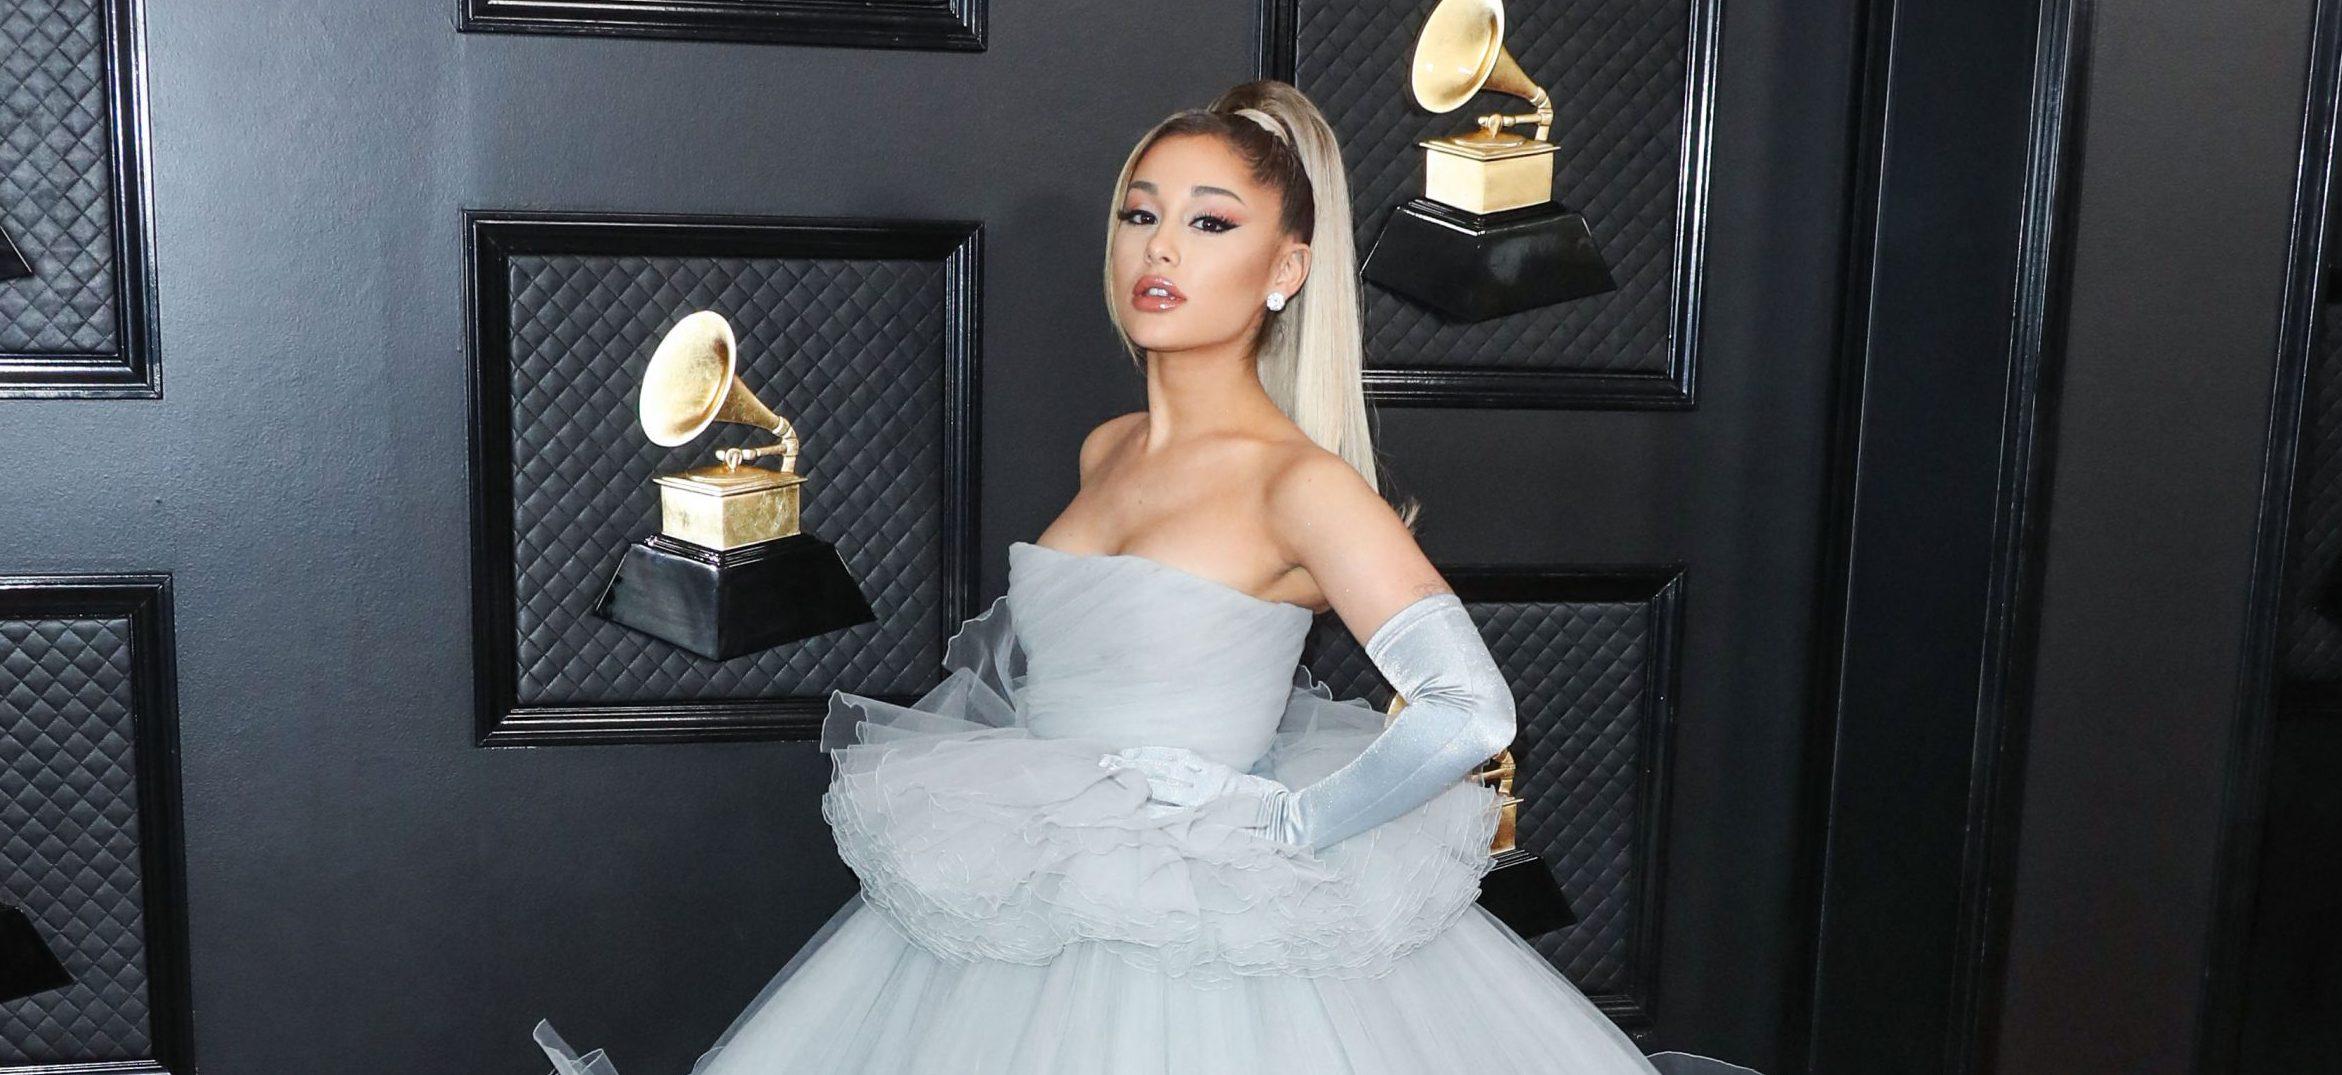 Ariana Grande Appears Unbothered Following Divorce News